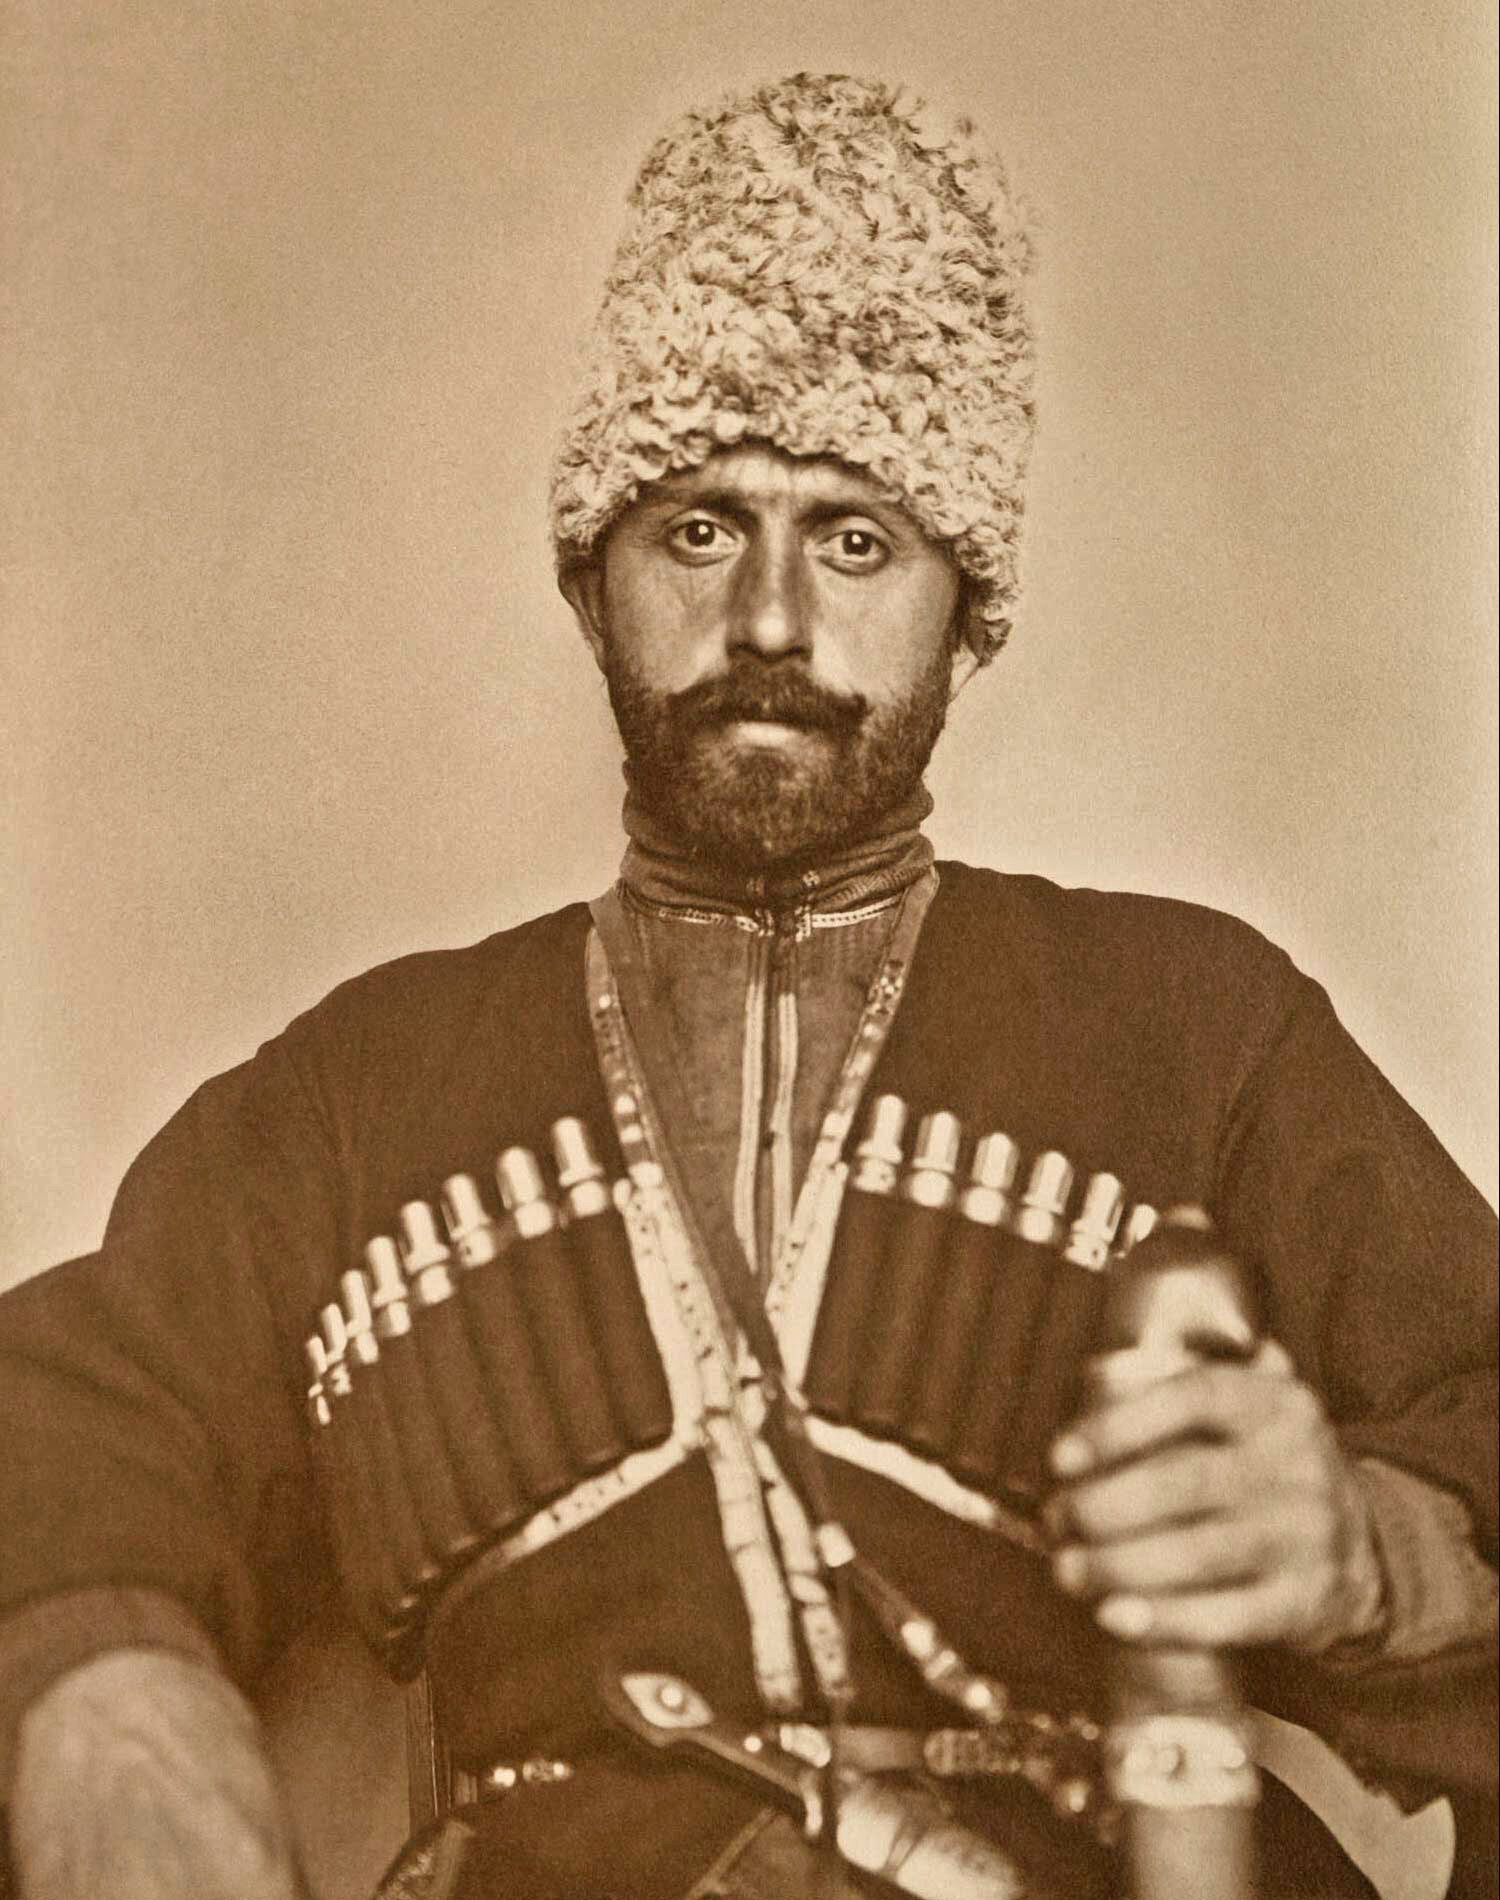 Cossack man from the steppes of Russia